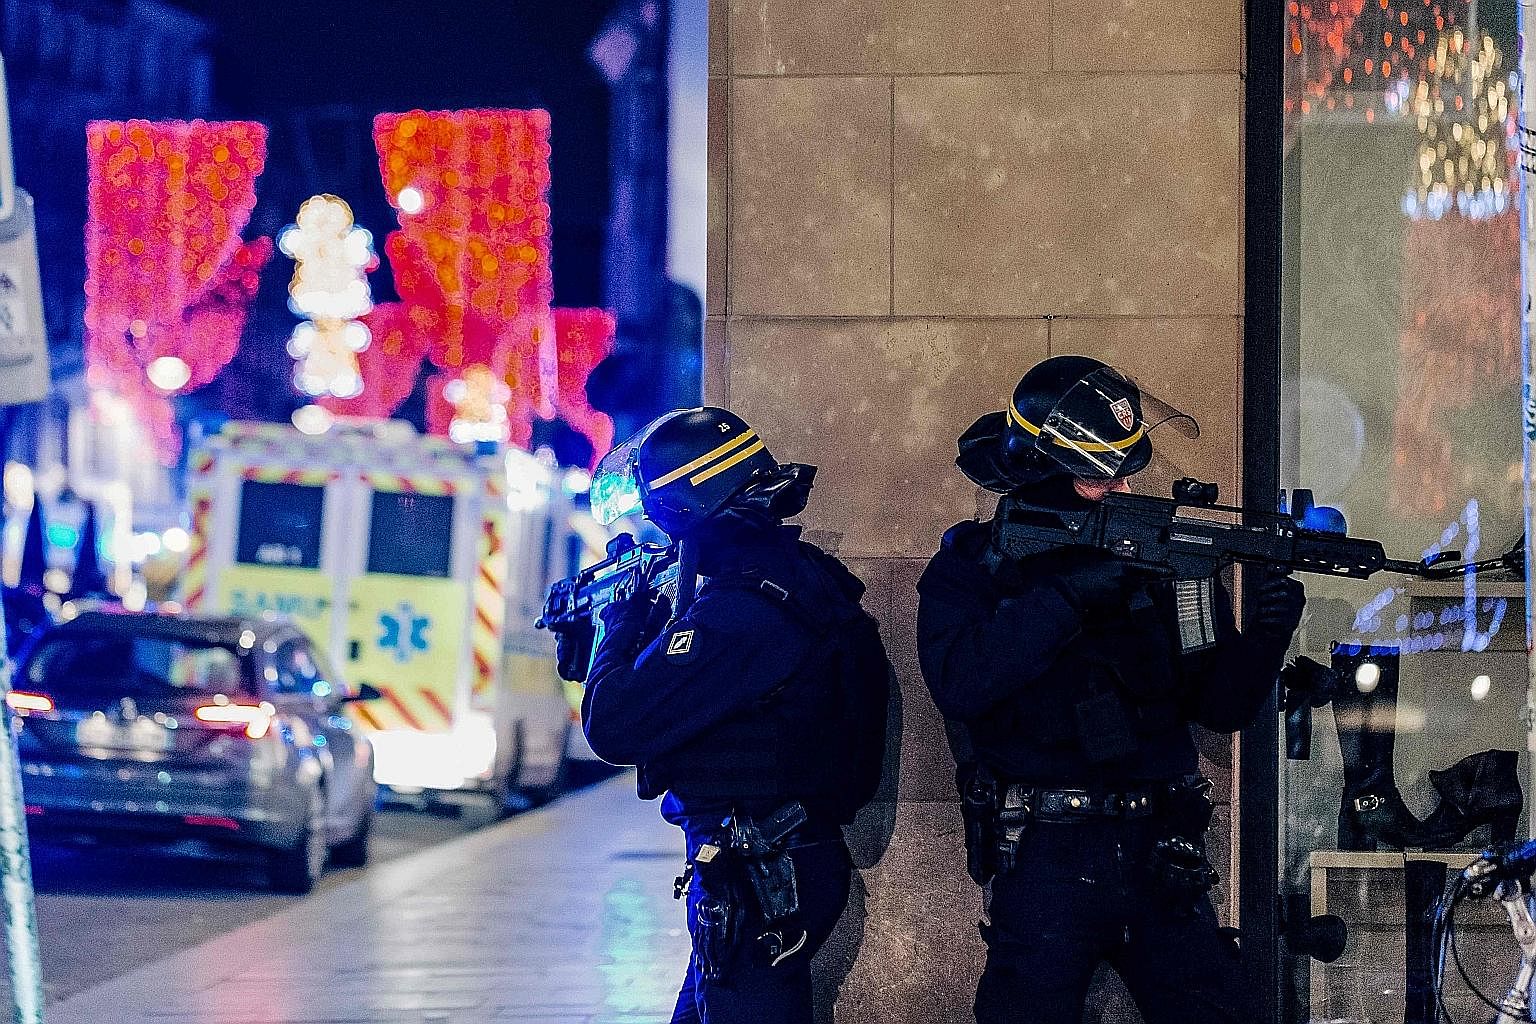 Police officers standing guard near the scene of a shooting on Tuesday in Strasbourg, eastern France, where a manhunt was launched for a gunman who killed at least two people near the city's famed Christmas market. Police identified the suspect as re